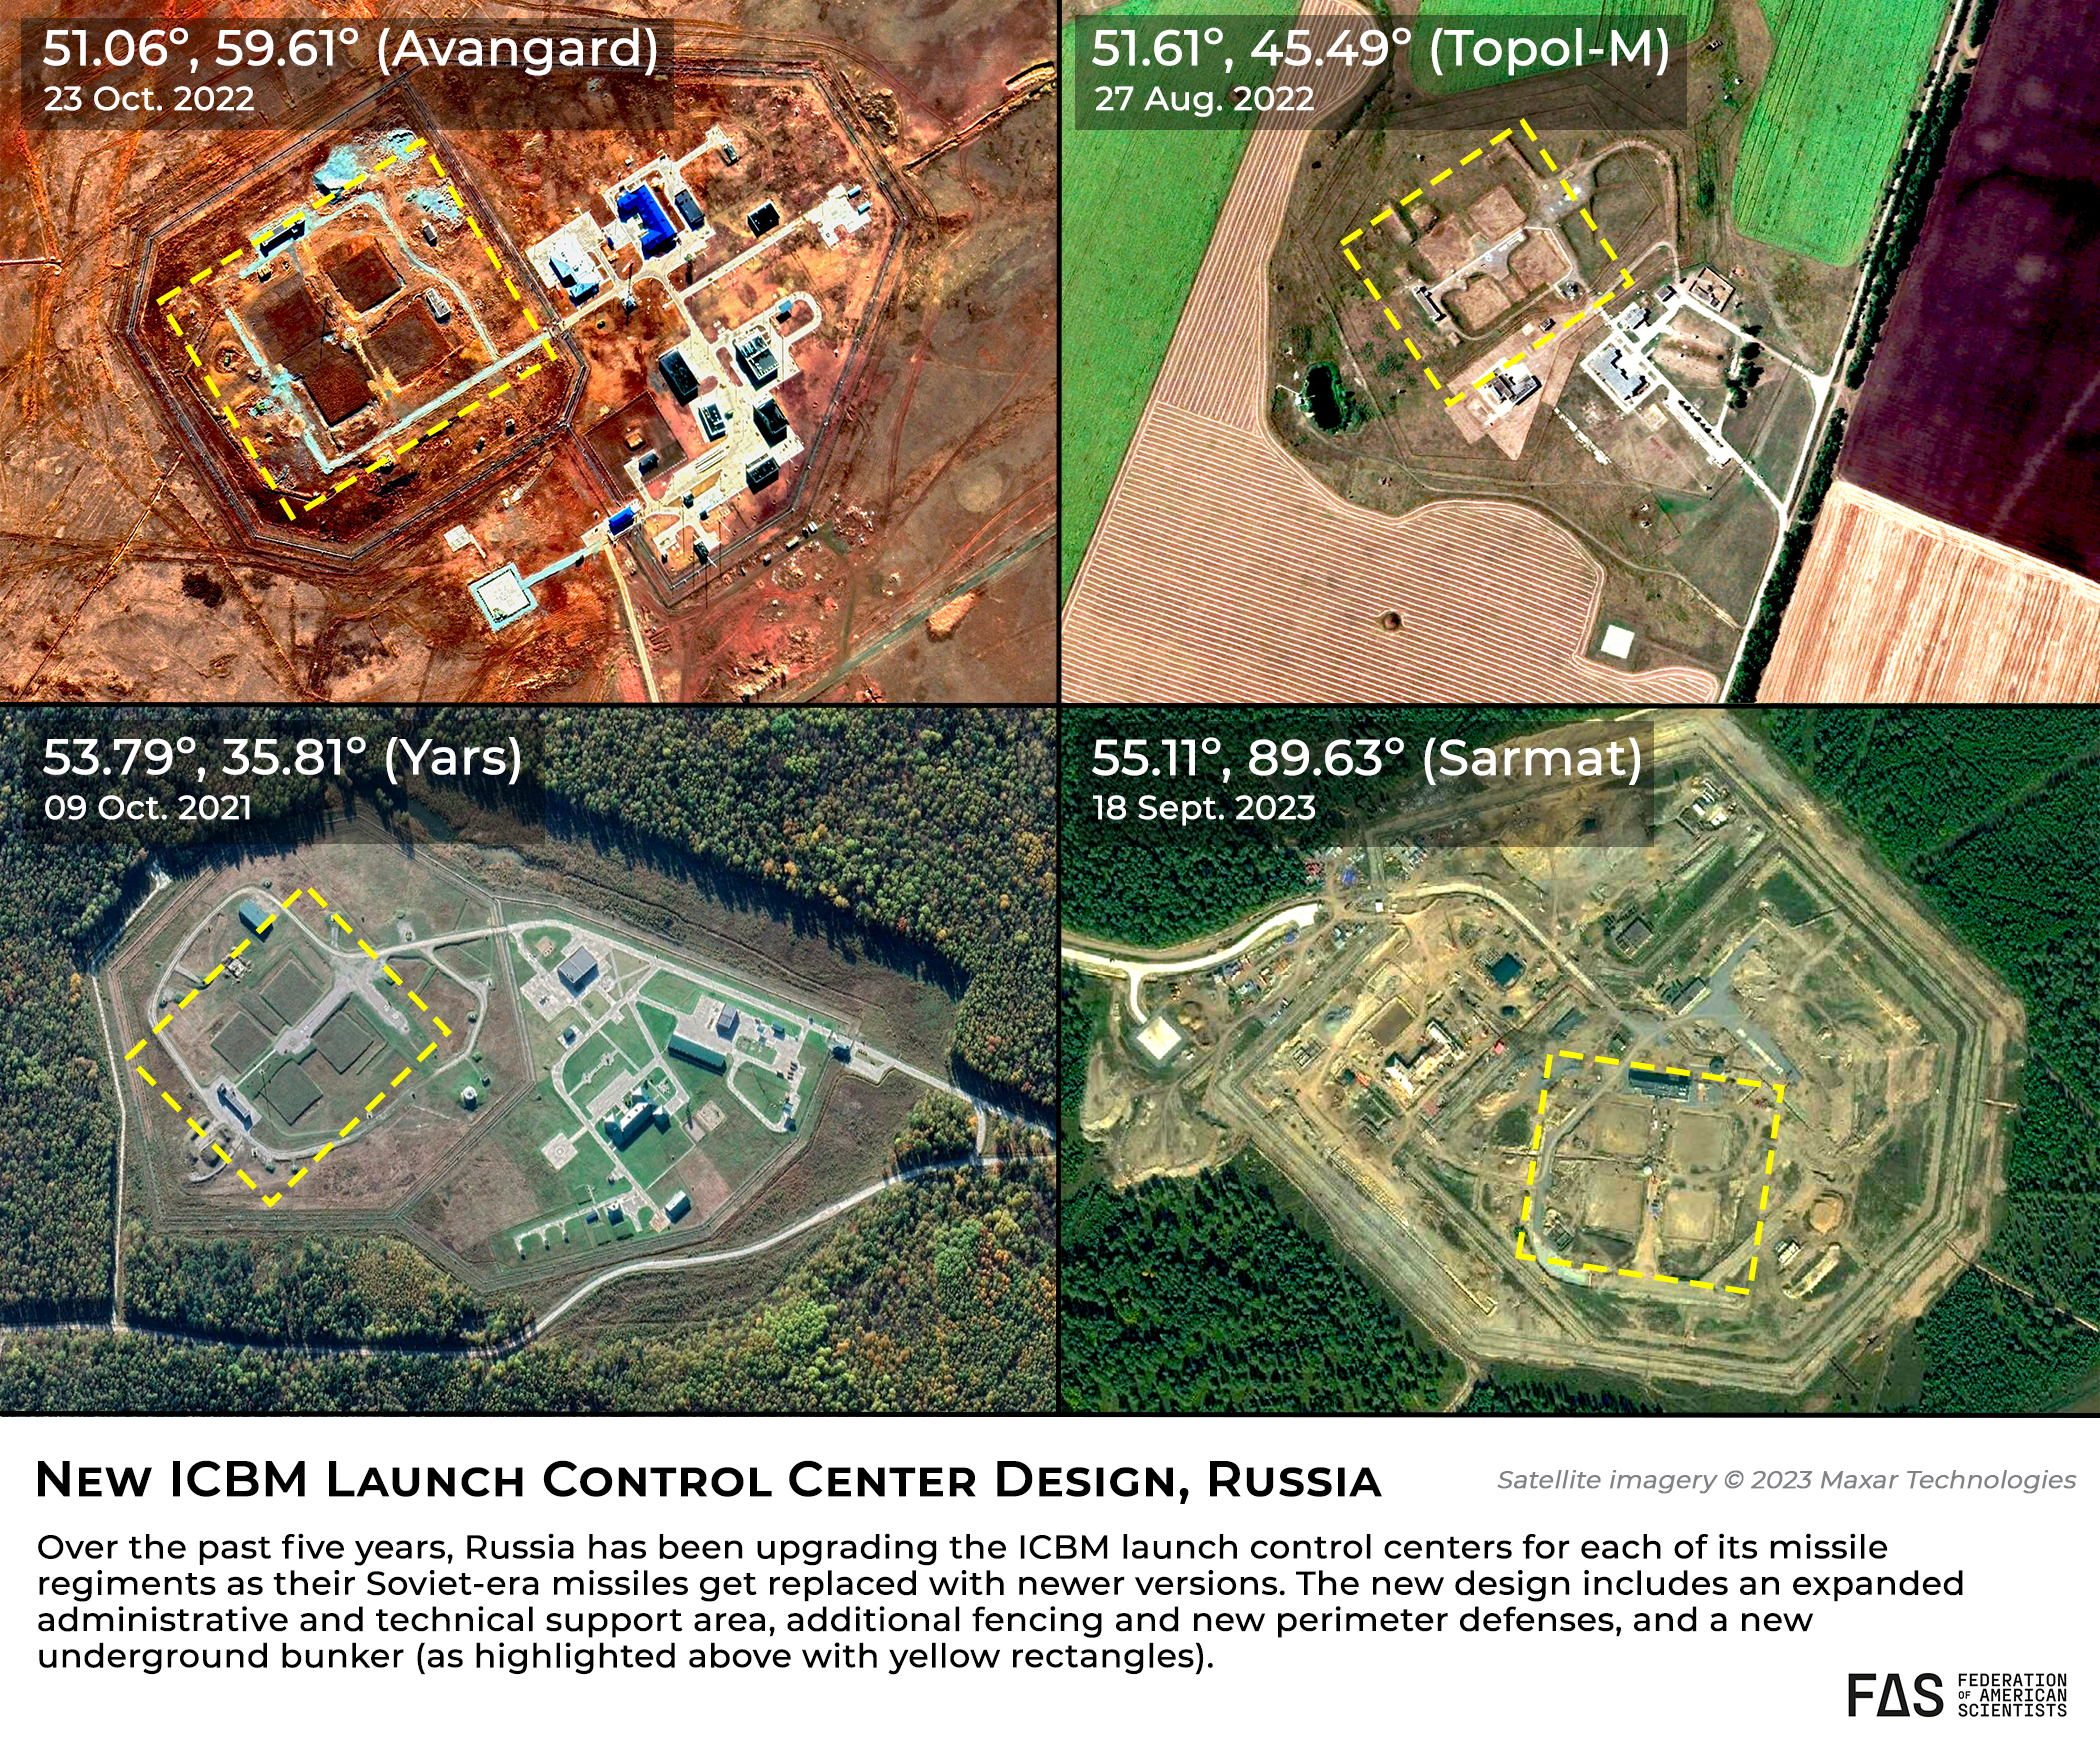 Annotated satellite image comparing and contrasting new ICBM launch control center designs across Russia.